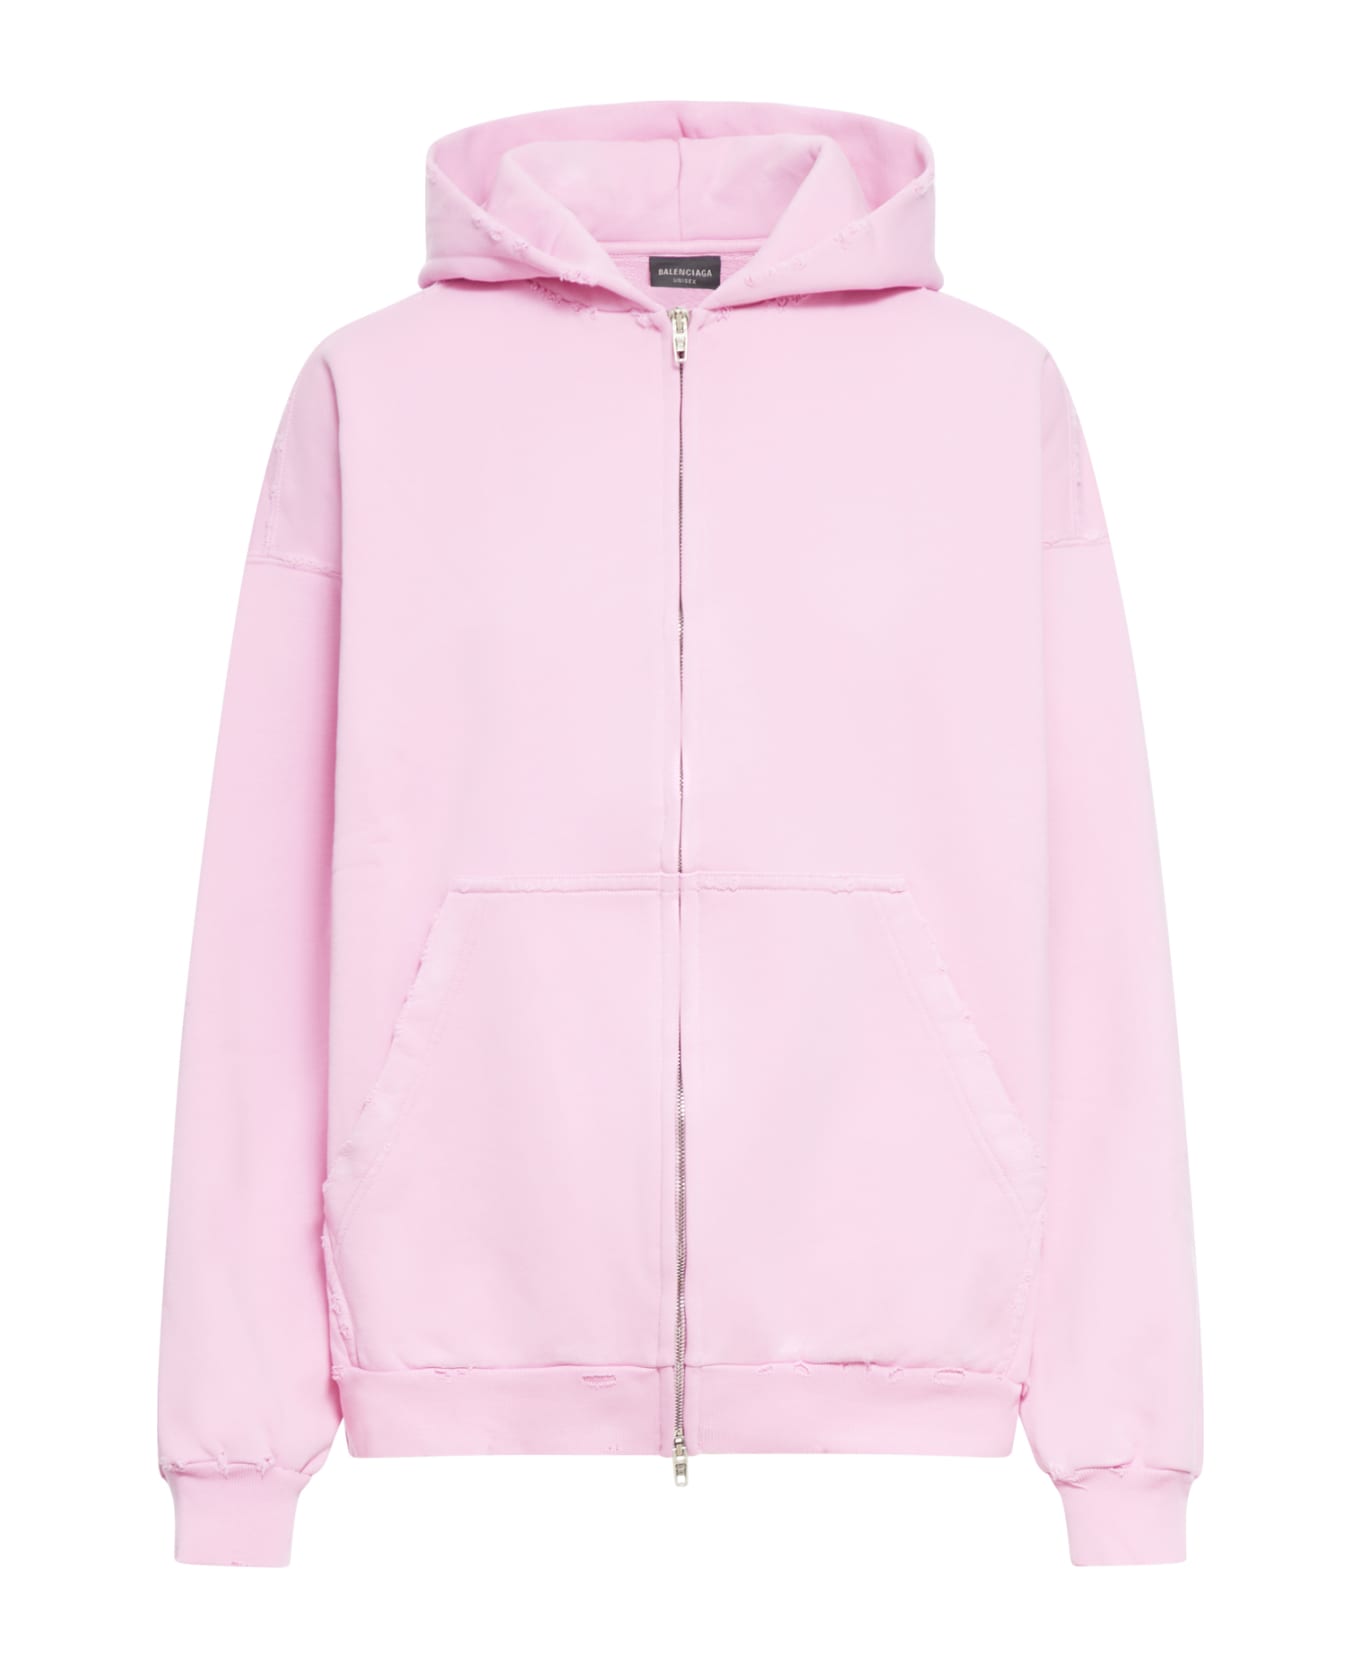 Balenciaga Zip-up Hoodie Not Been Done Archetype Moll - Faded Pink